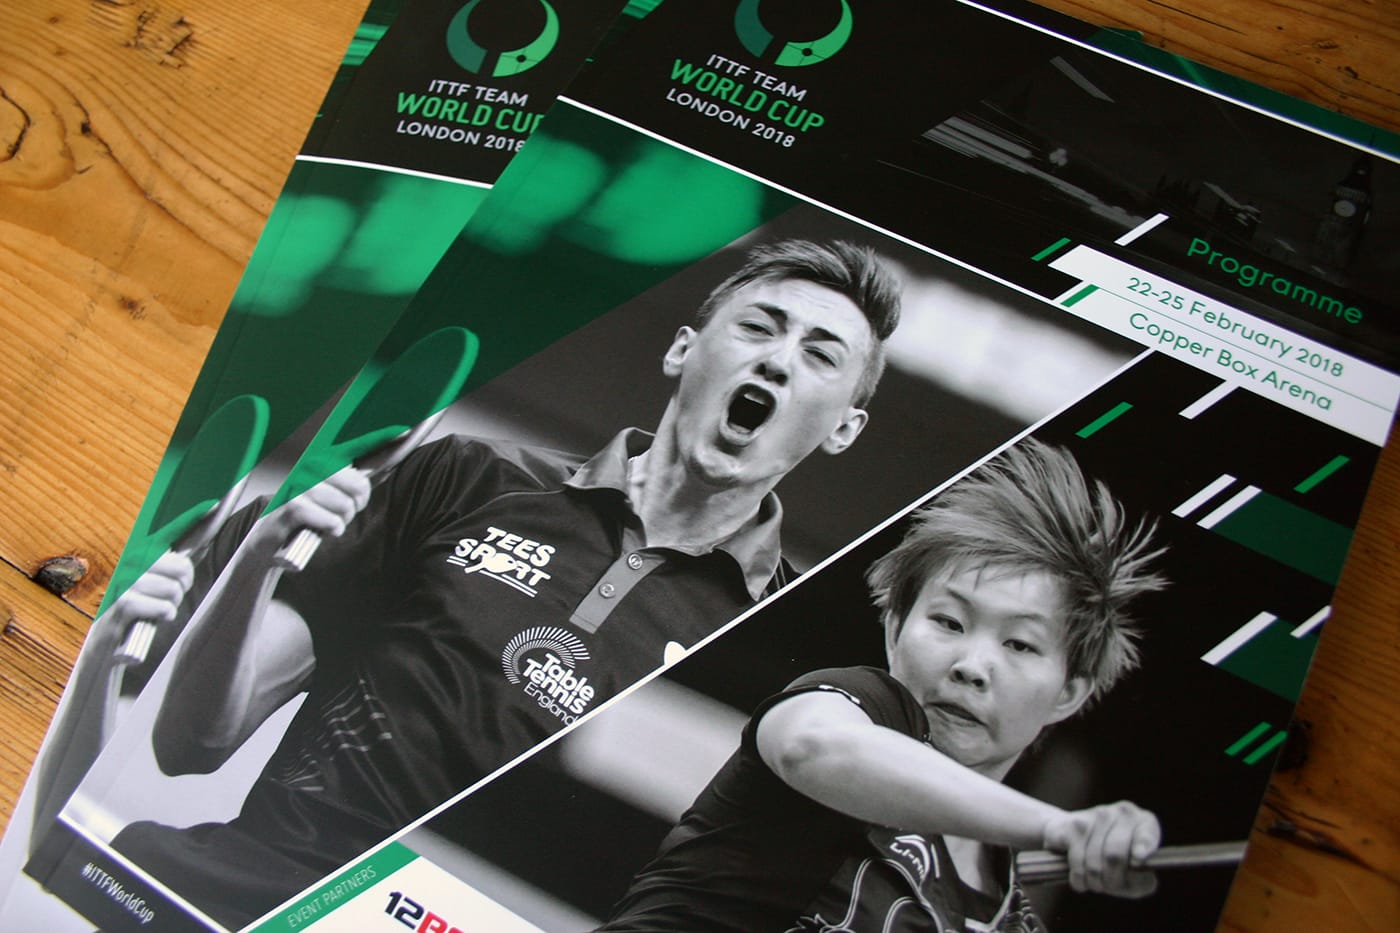 Design and production of the official event programme for the 2018 ITTF Team World Cup